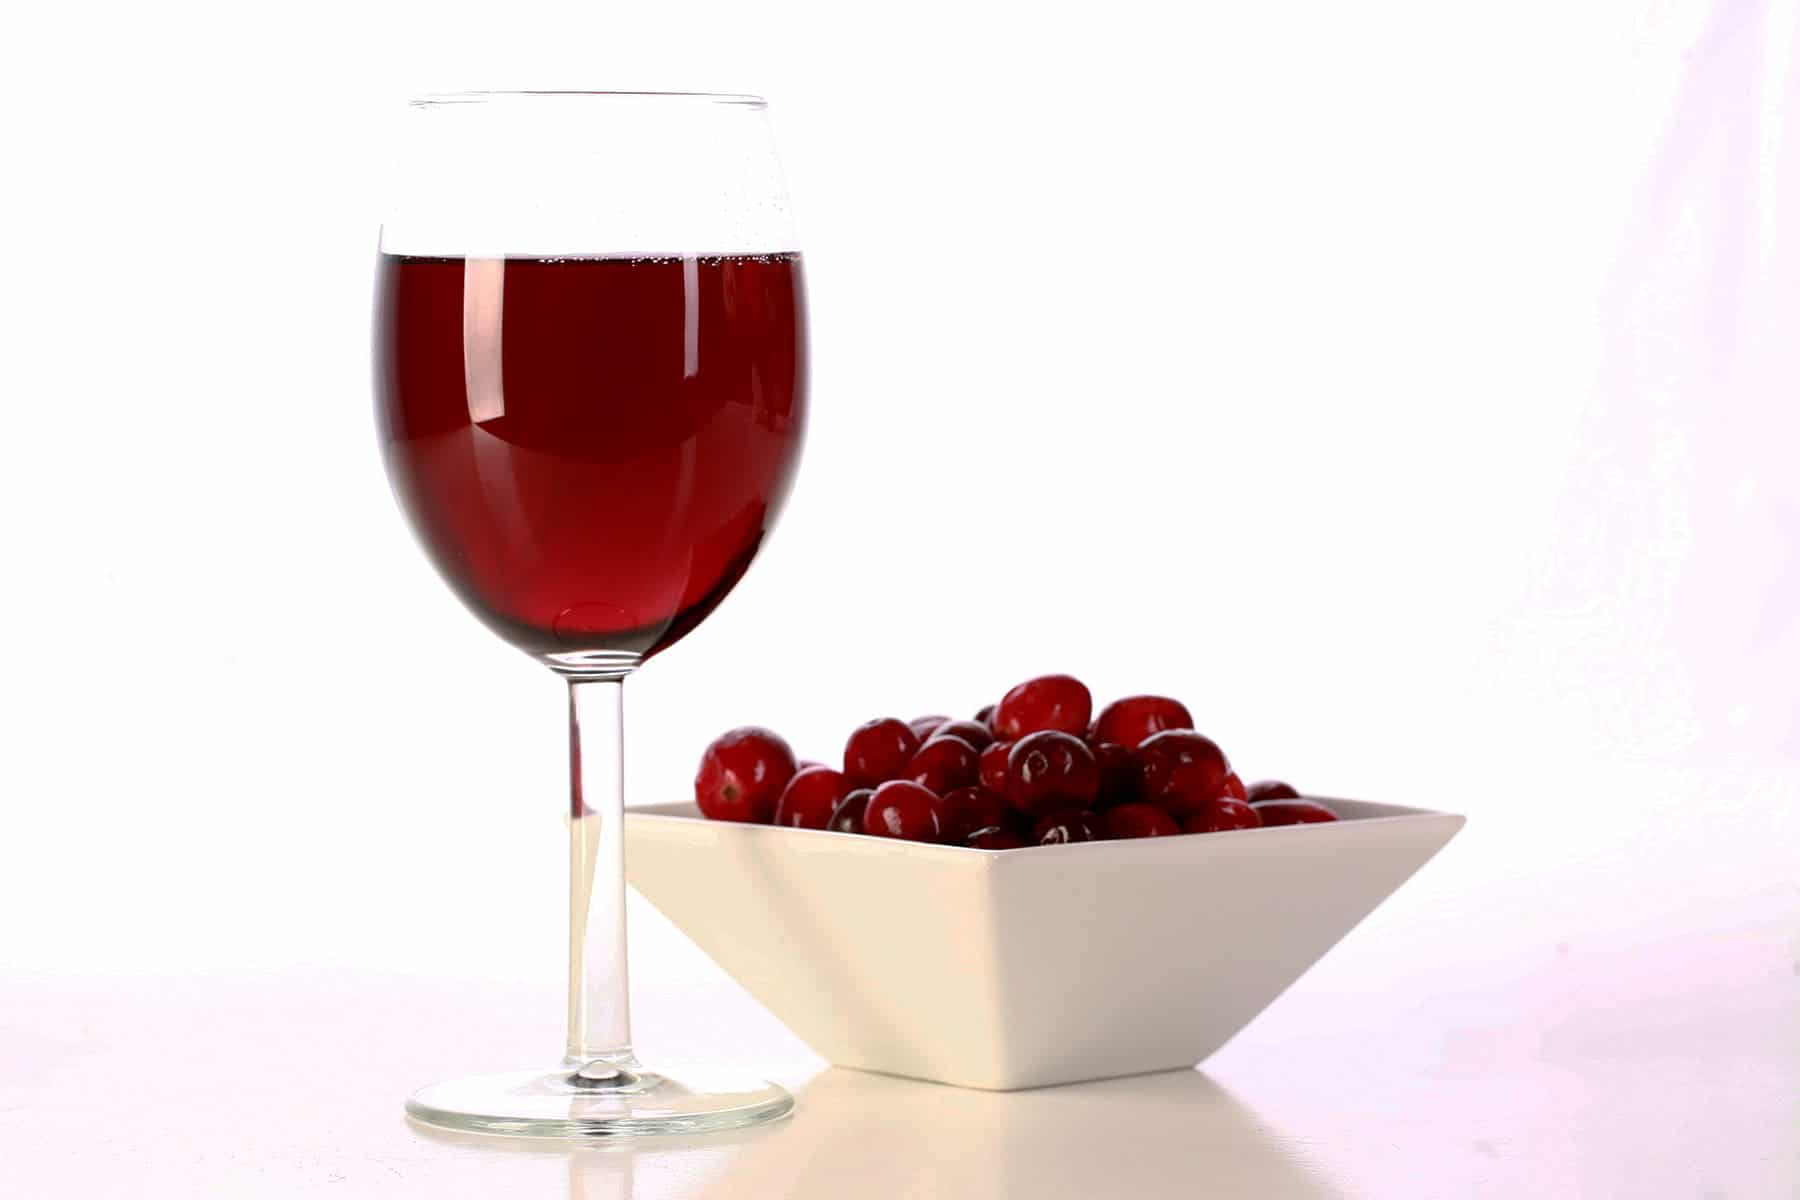 A glass of red wine is pictured next to a small bowl of fresh cranberries, against a white background.